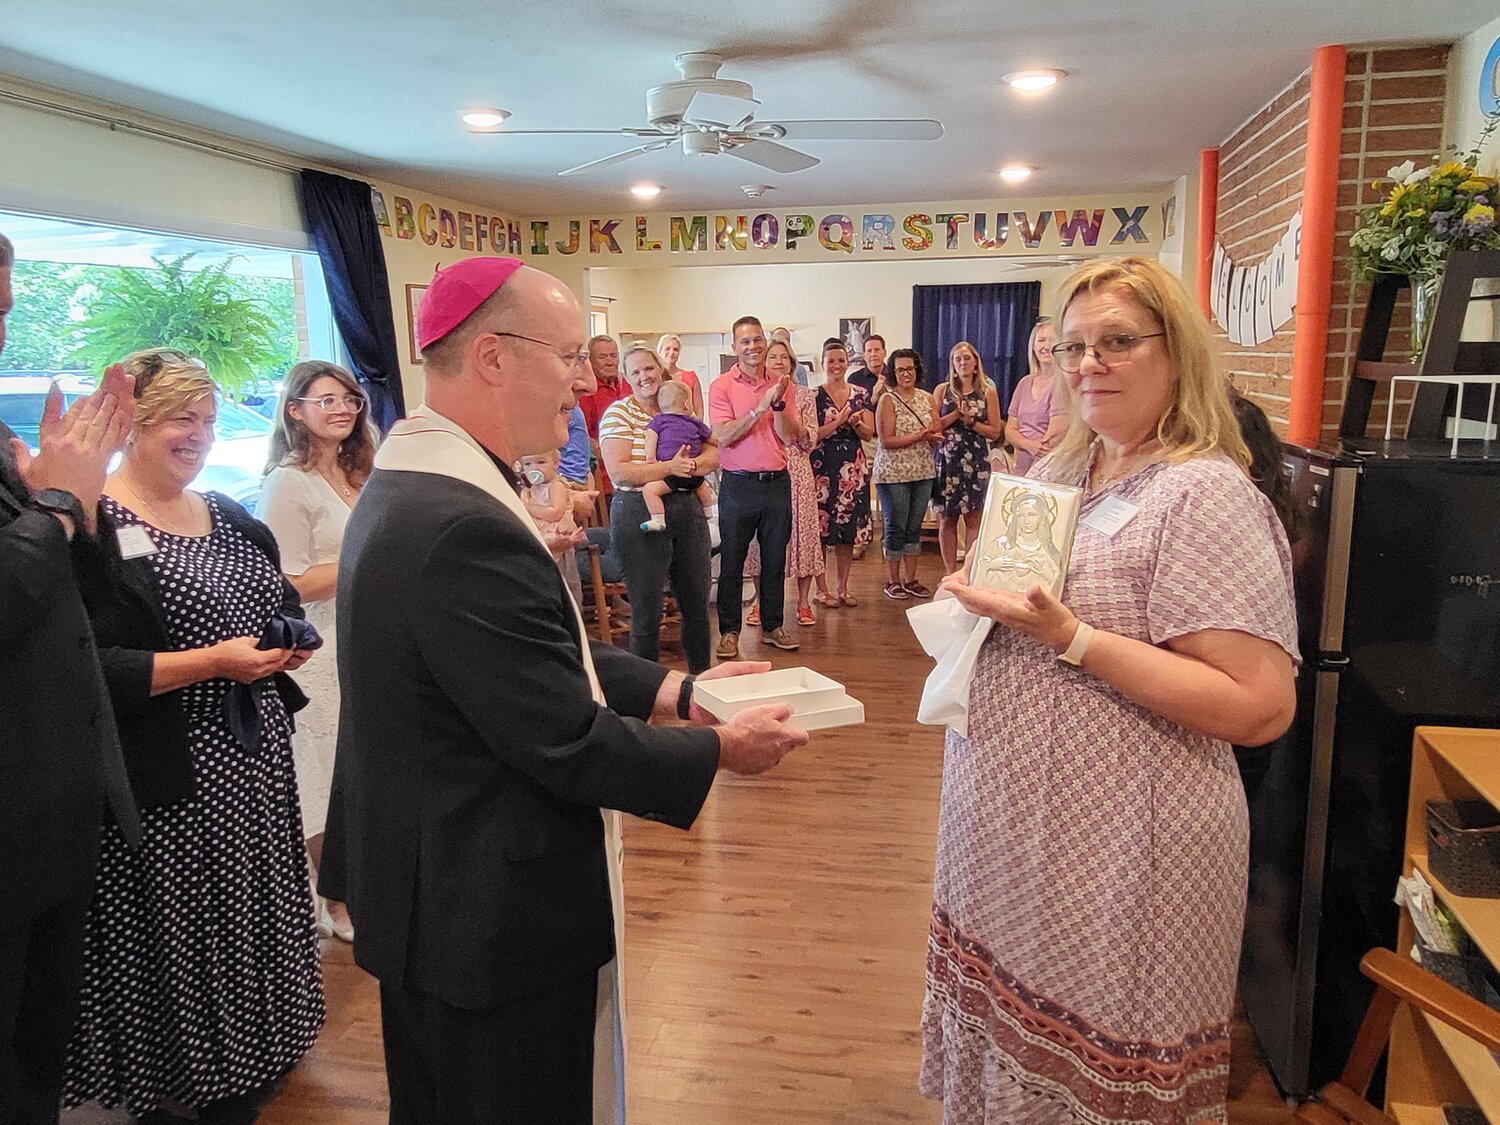 Leann Rockwell, director of the Immaculate Heart of Mary Child Development Center in Jefferson City, displays an image of the Blessed Mother and her Immaculate Heart, during the blessing and dedication ceremony of the center on Aug. 6.